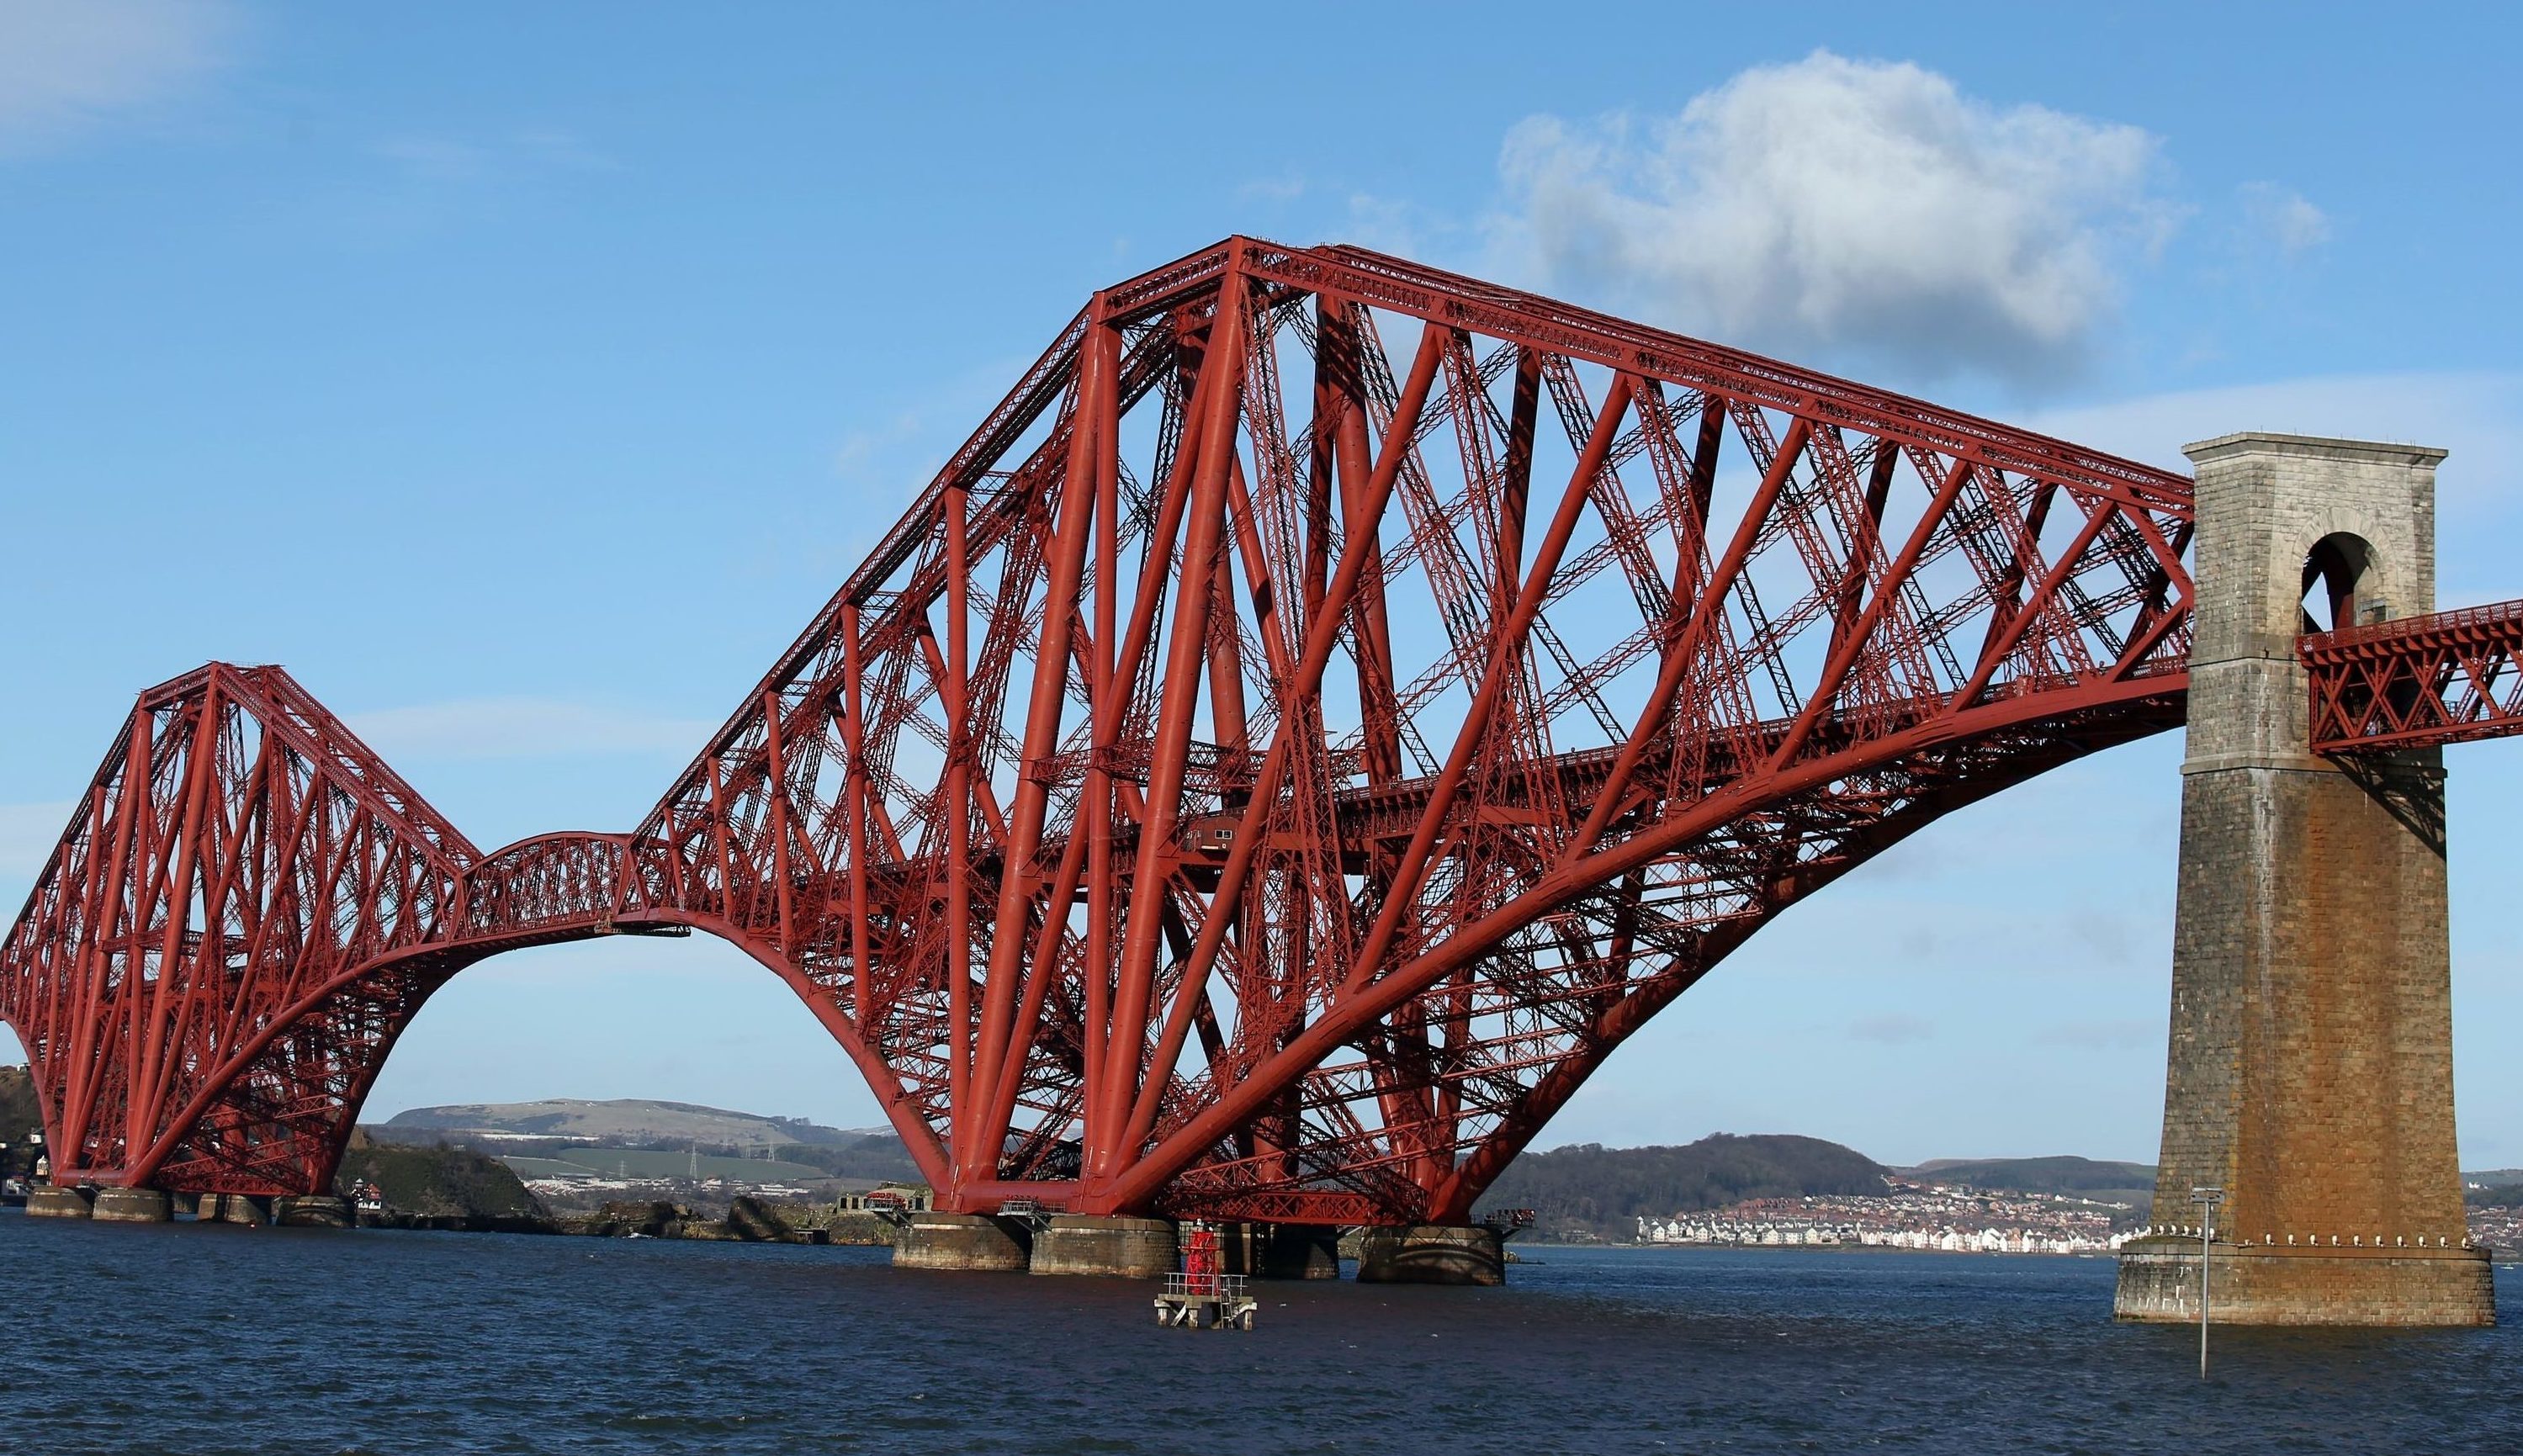 The hotel has views over the Forth Bridge, which is a World Heritage Site.